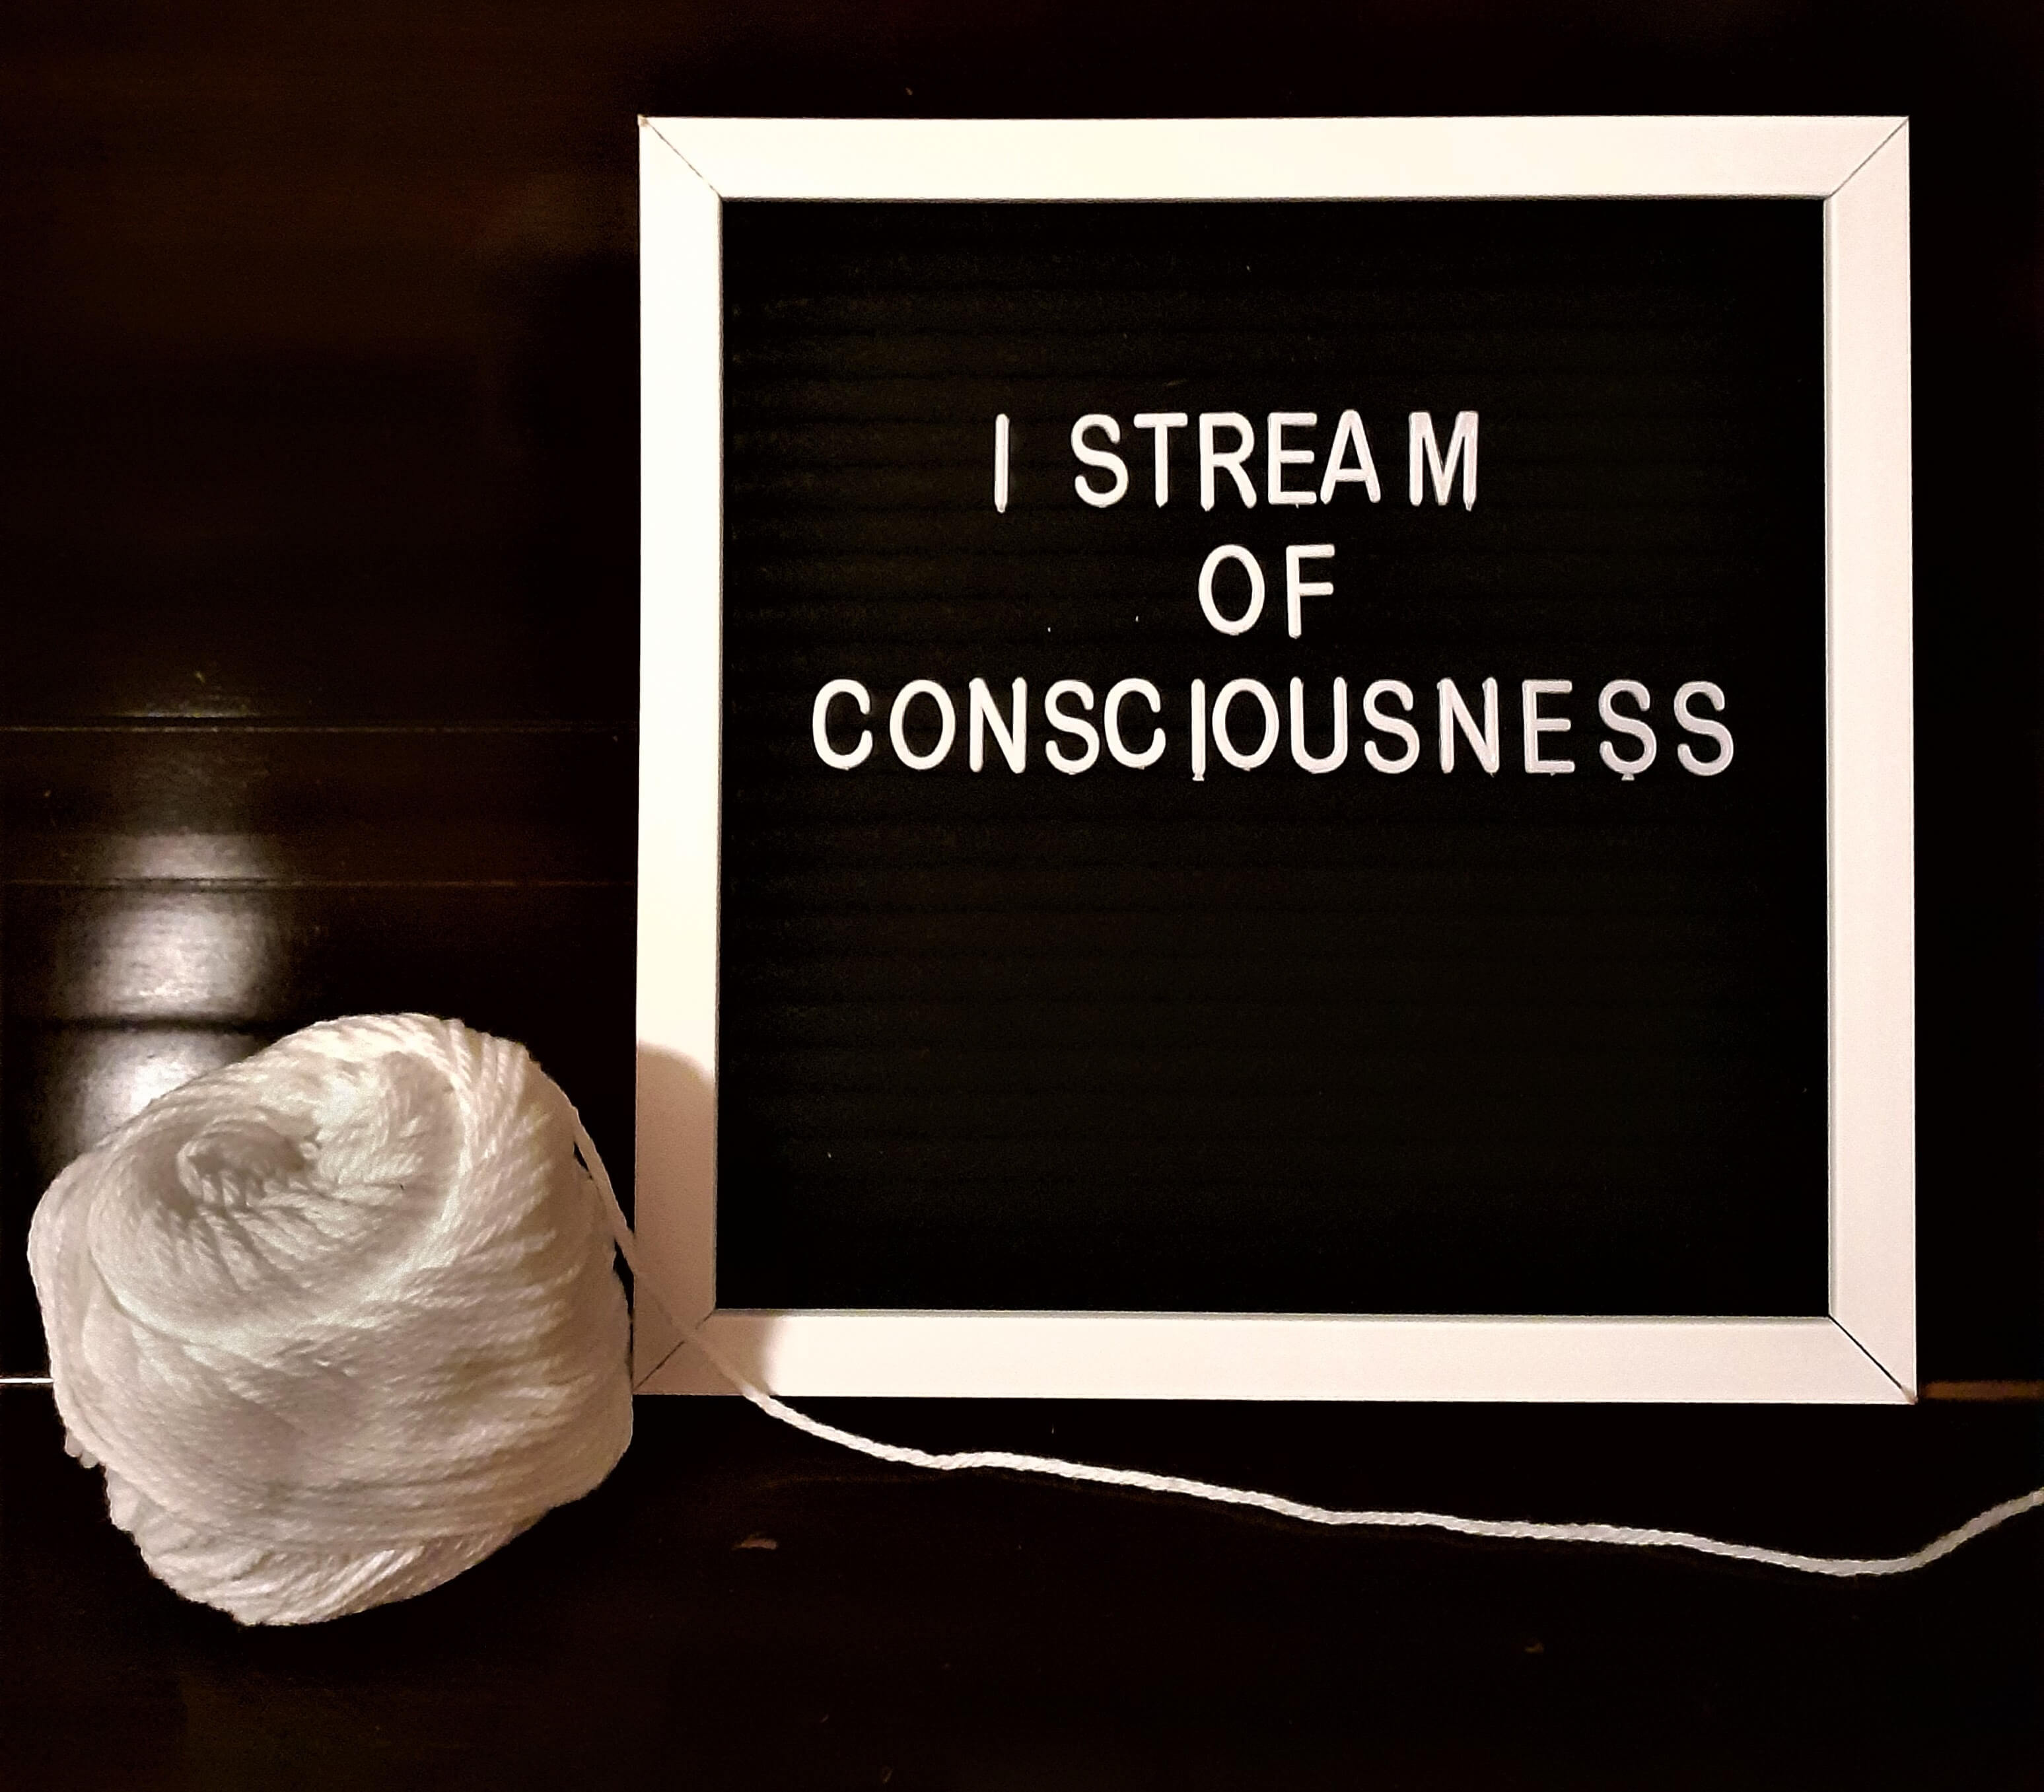 stream of consciousness sign and unraveling yarn